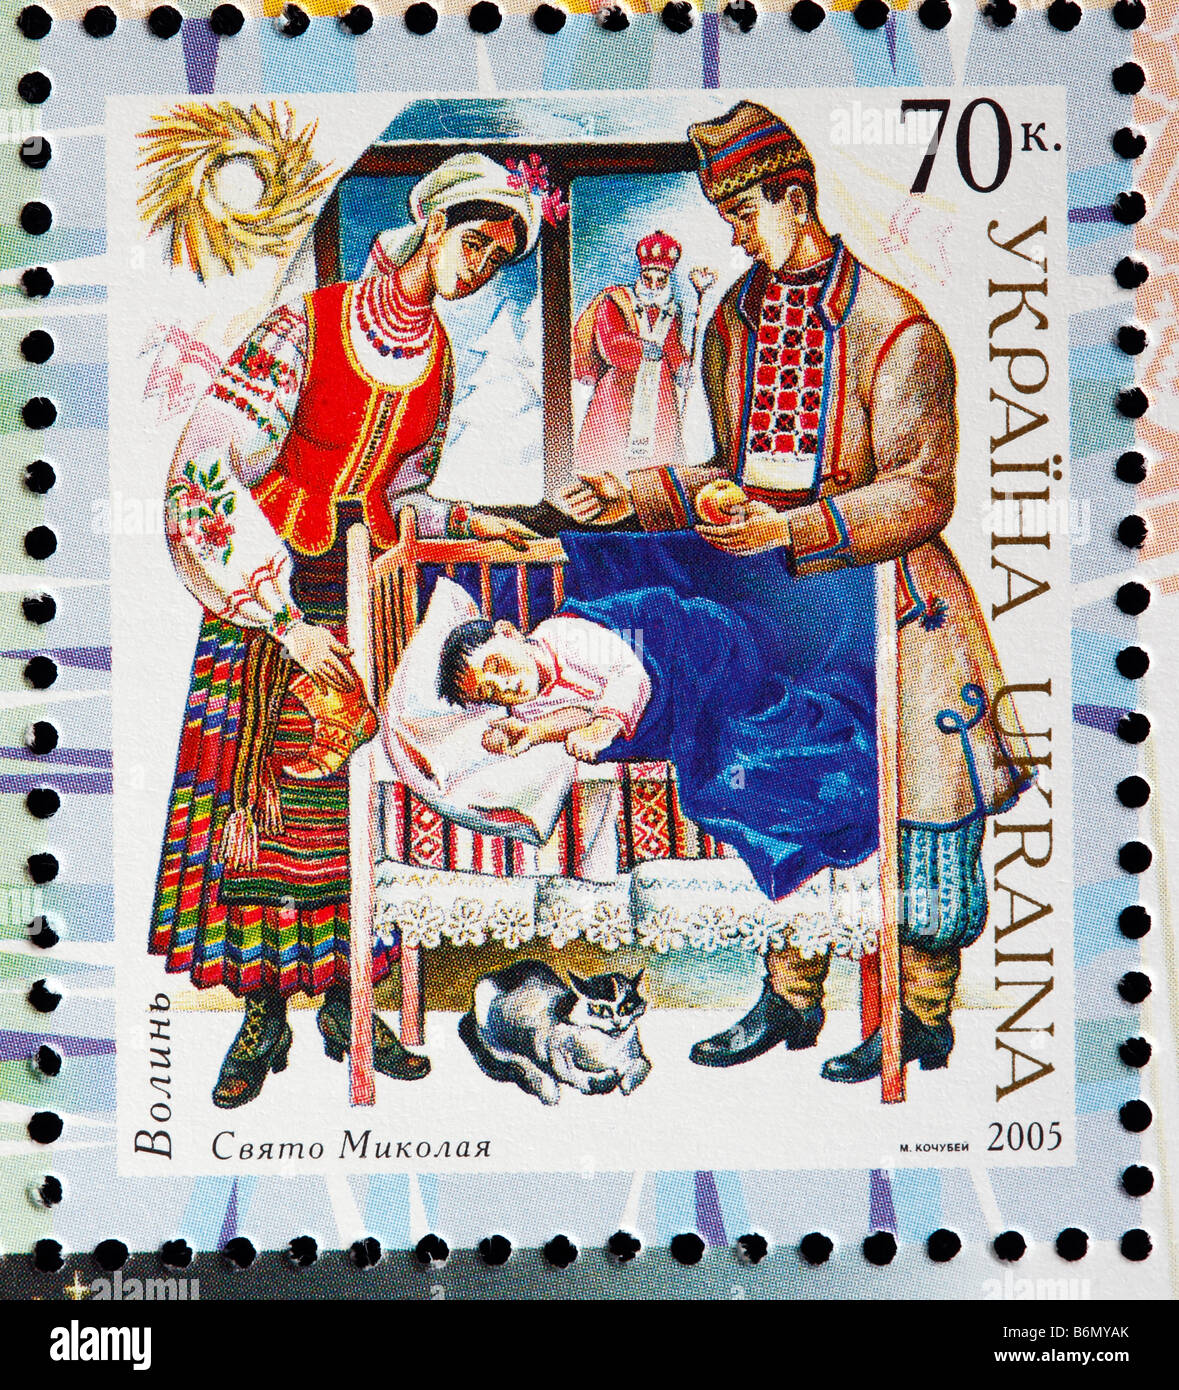 People in traditional costumes, Ukrainian national holiday, Volynia, postage stamp, Ukraine, 2005 Stock Photo